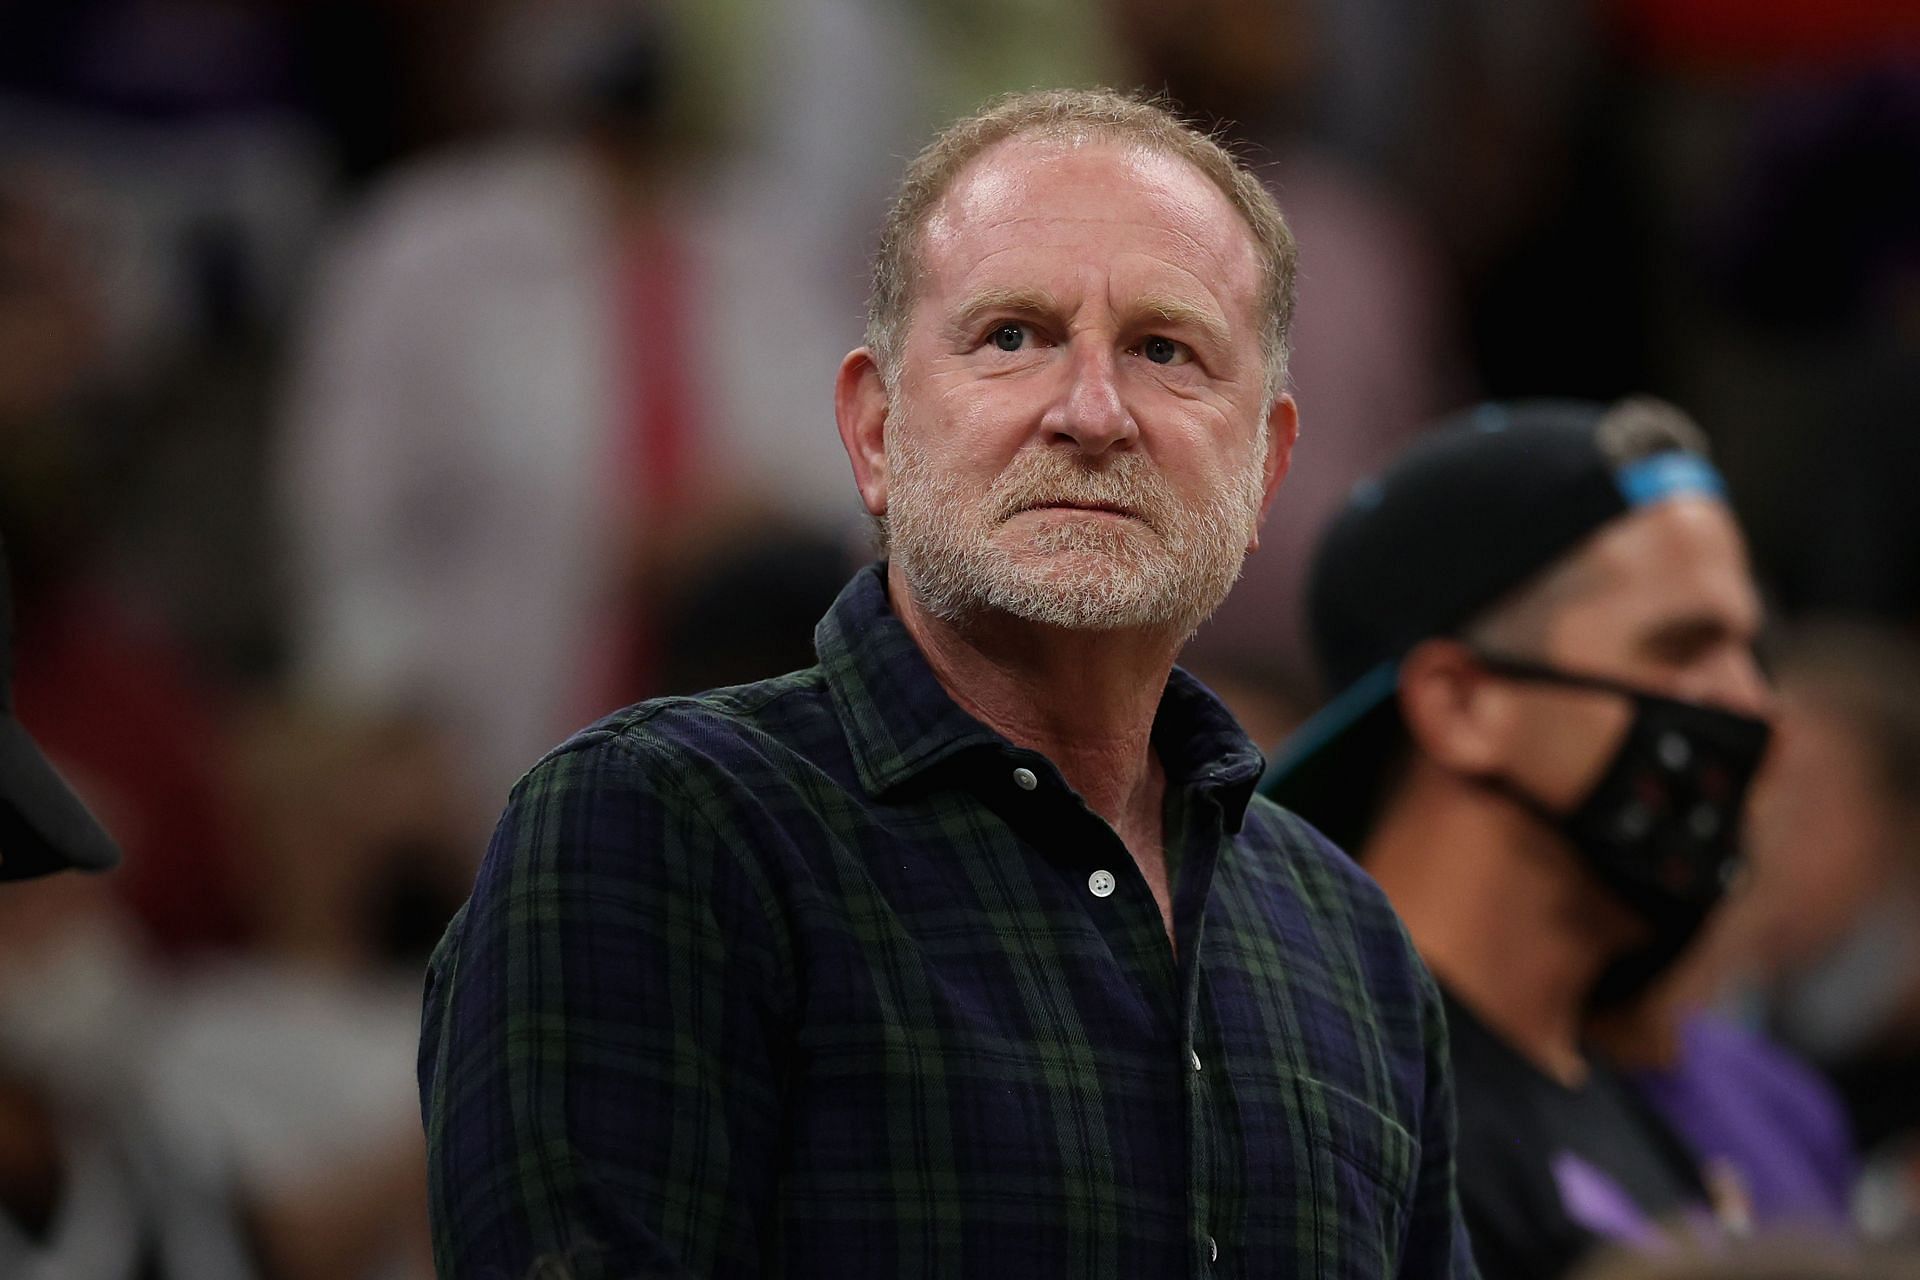 Phoenix Suns owner Robert Sarver has put the team up for sale